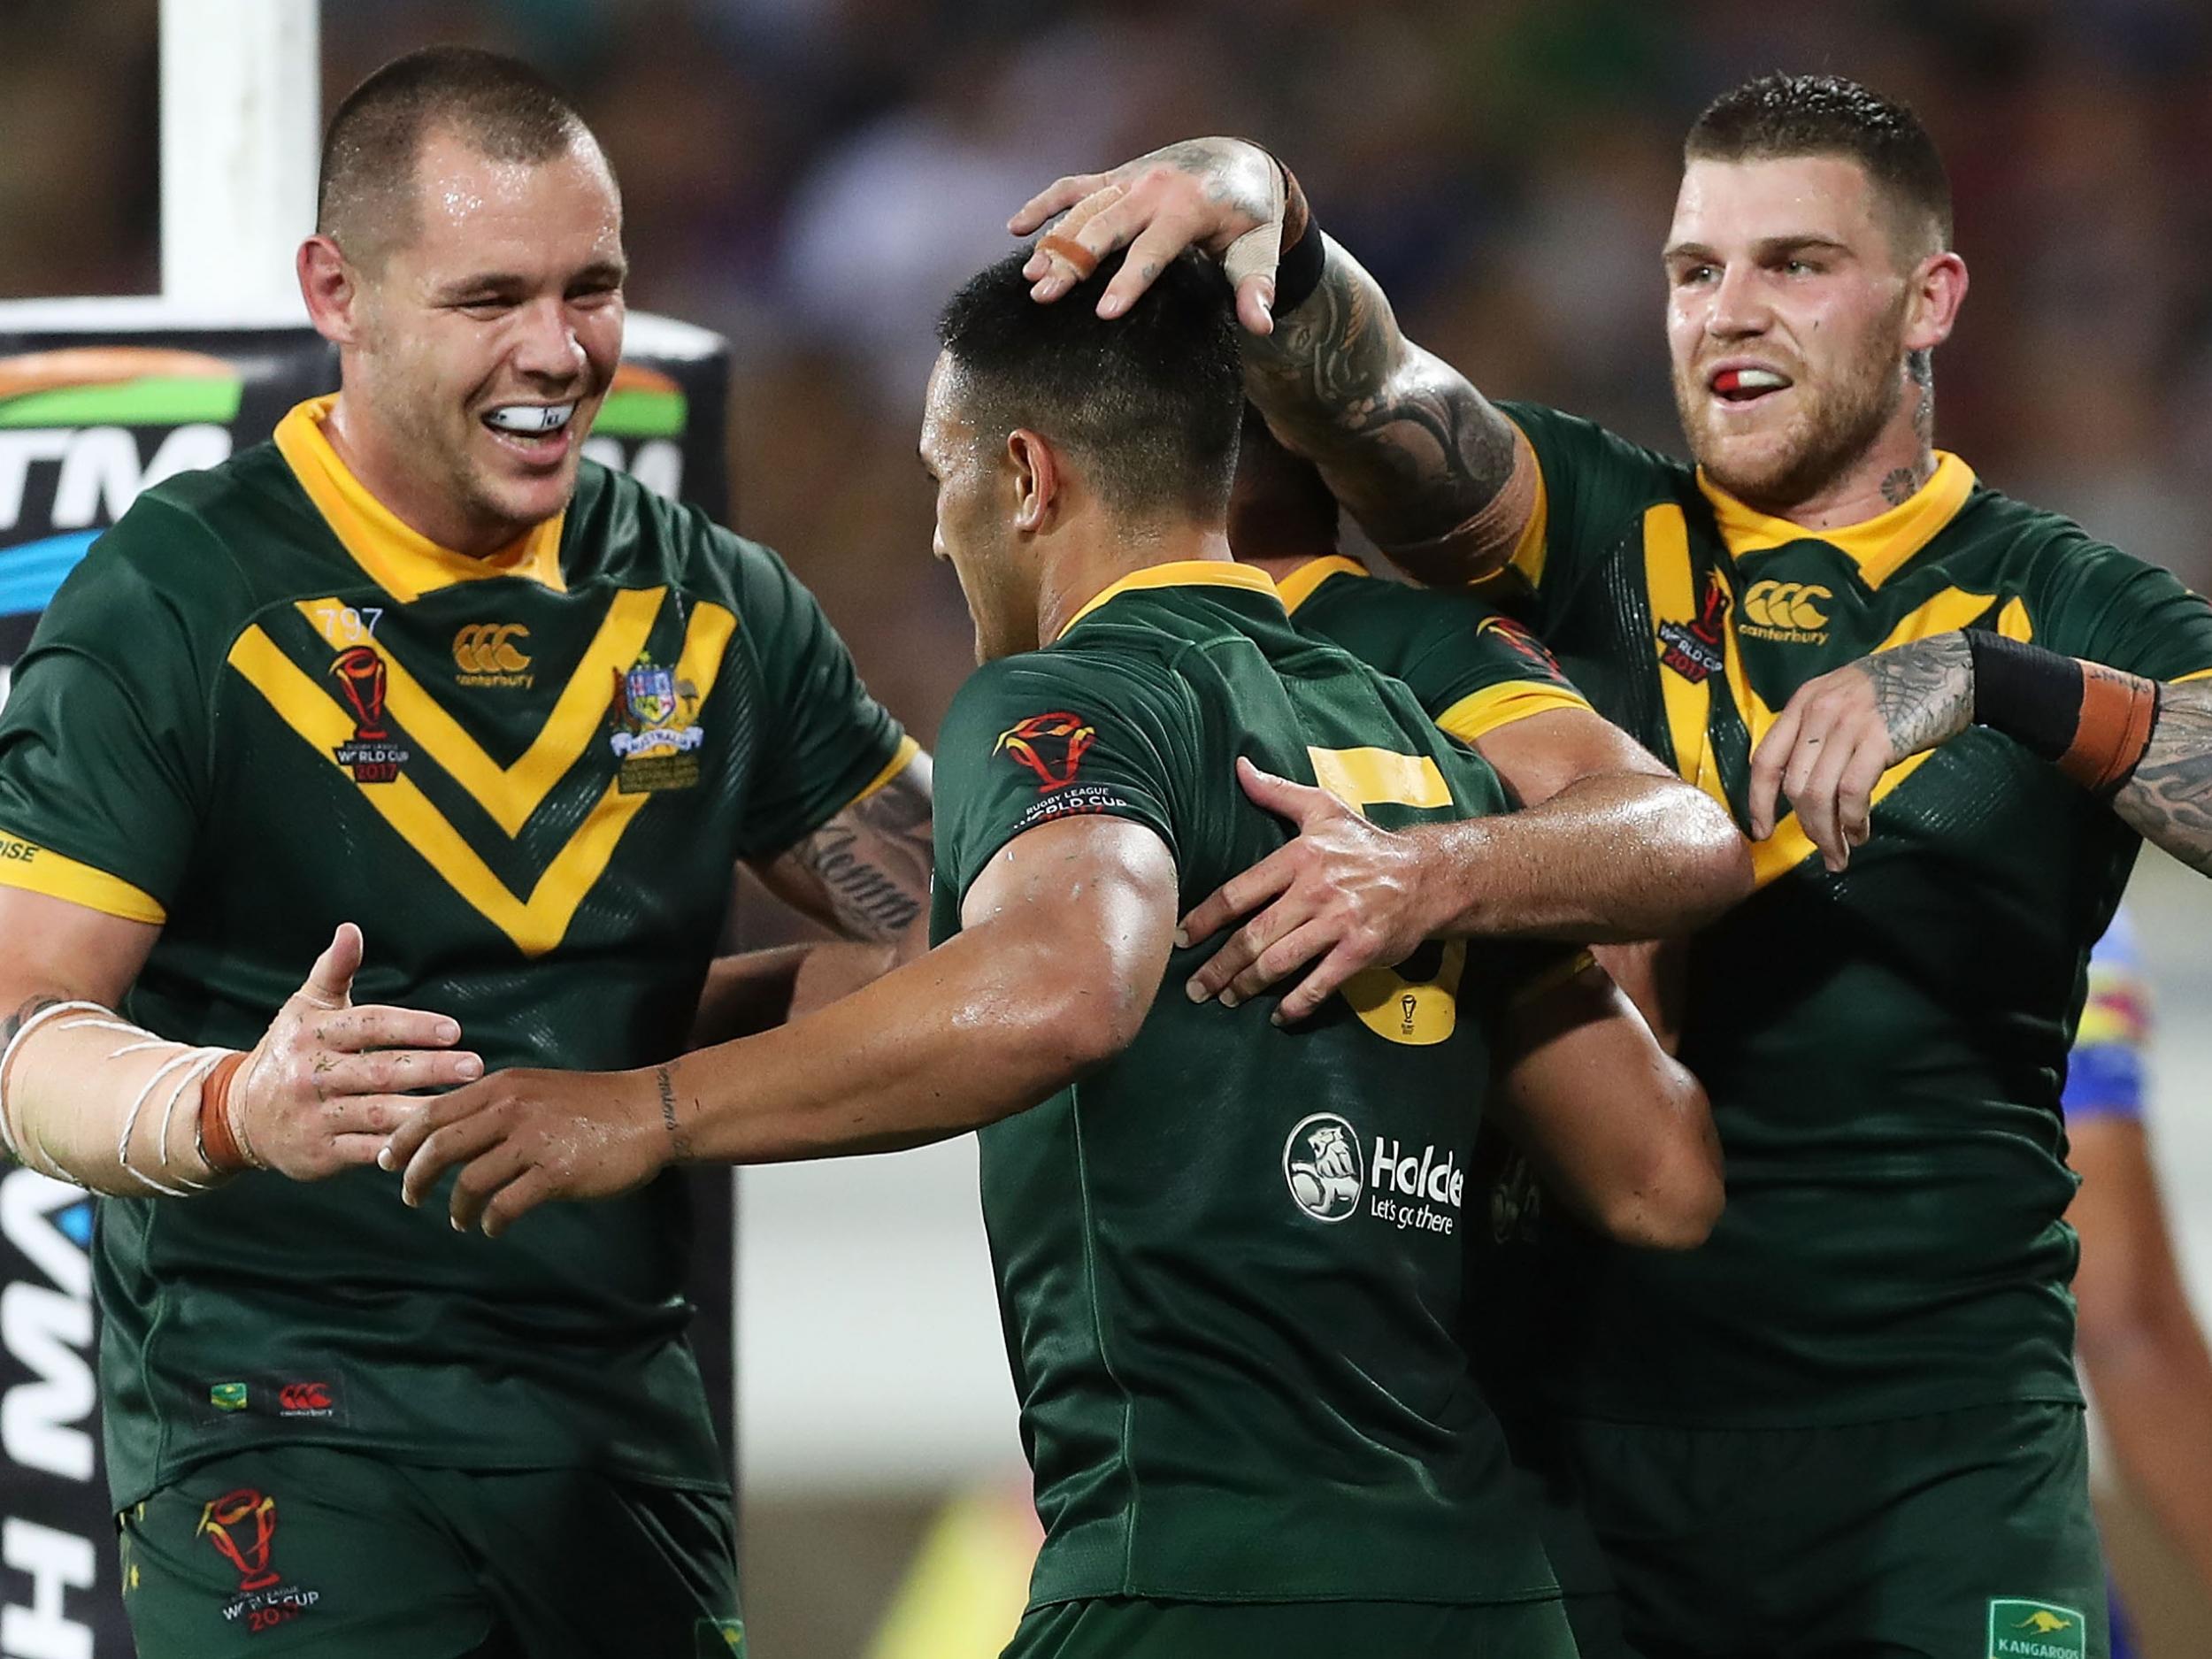 Australia will face either Fiji or New Zealand